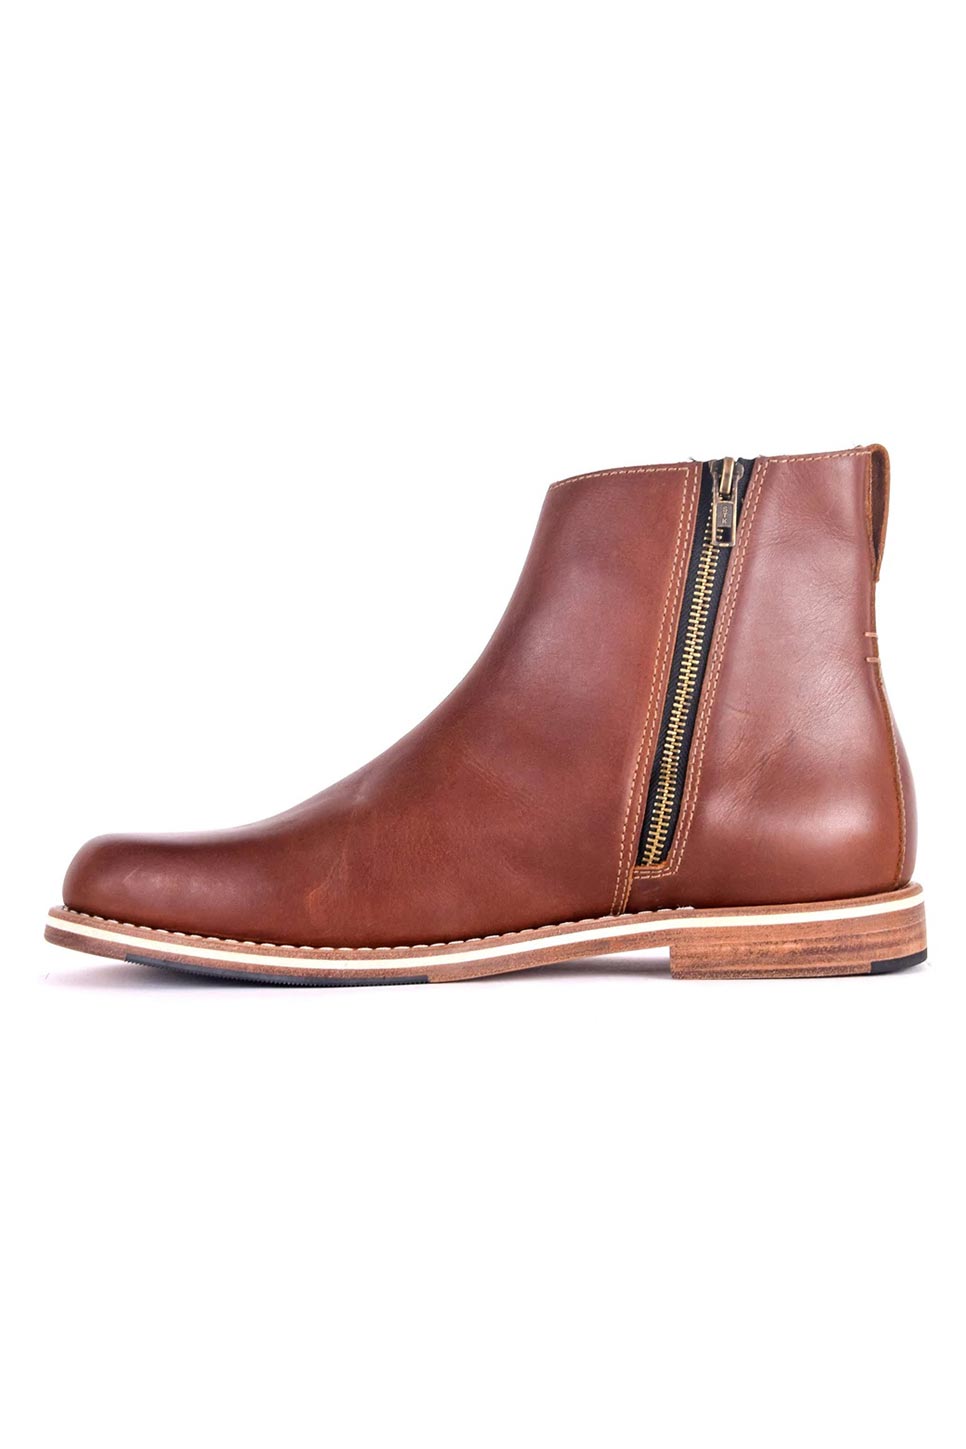 Helm Boots - The Pablo - Brown - Side